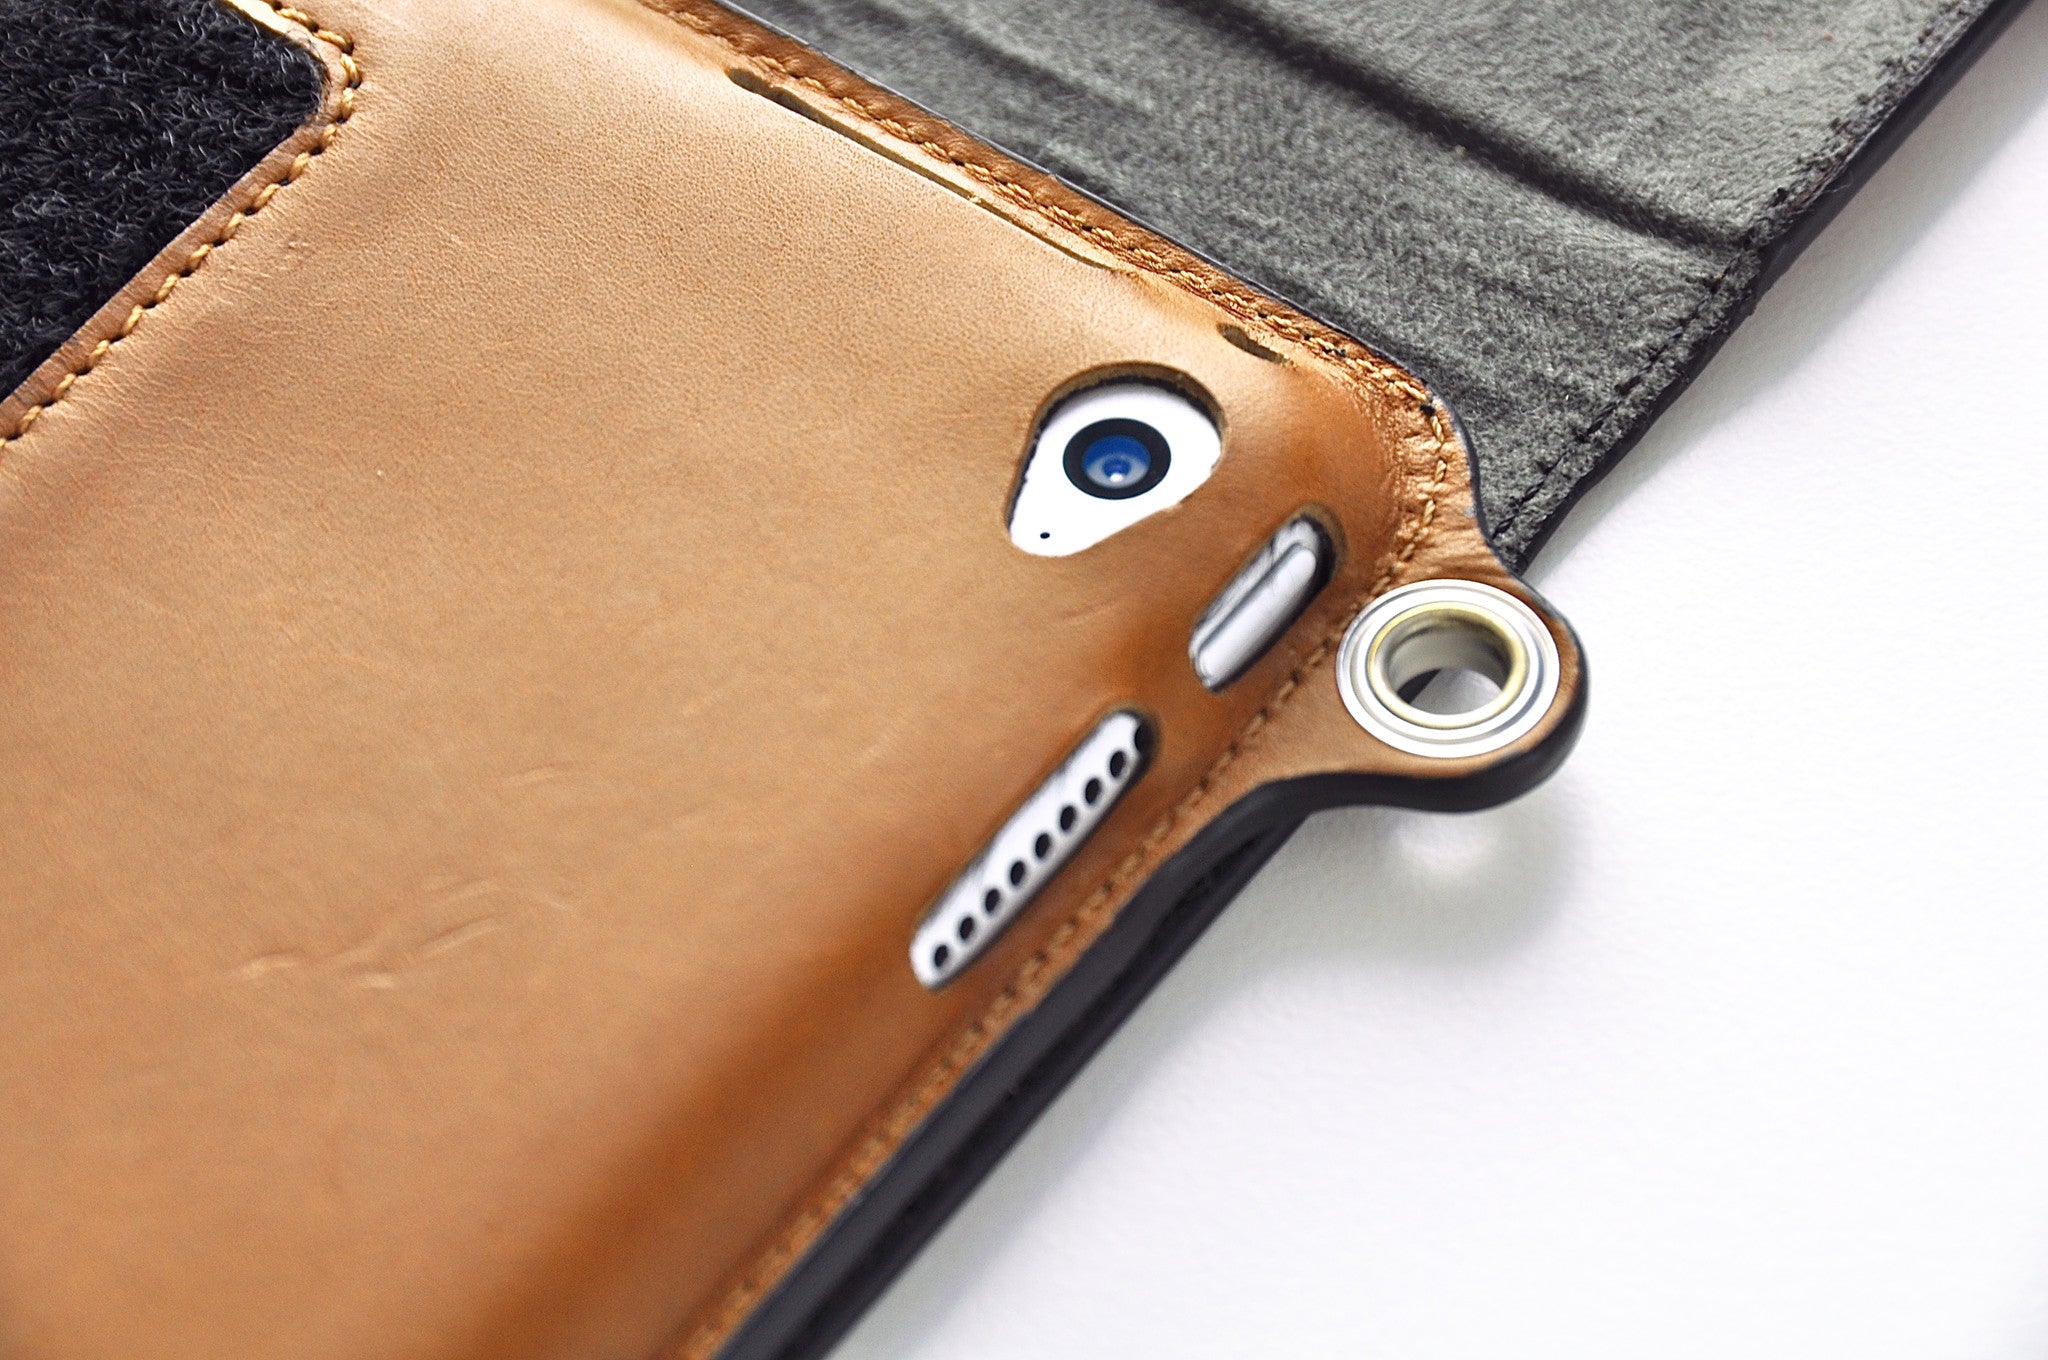 Camera lens is exposed for taking pictures when iPad case is in hands-free mode. 